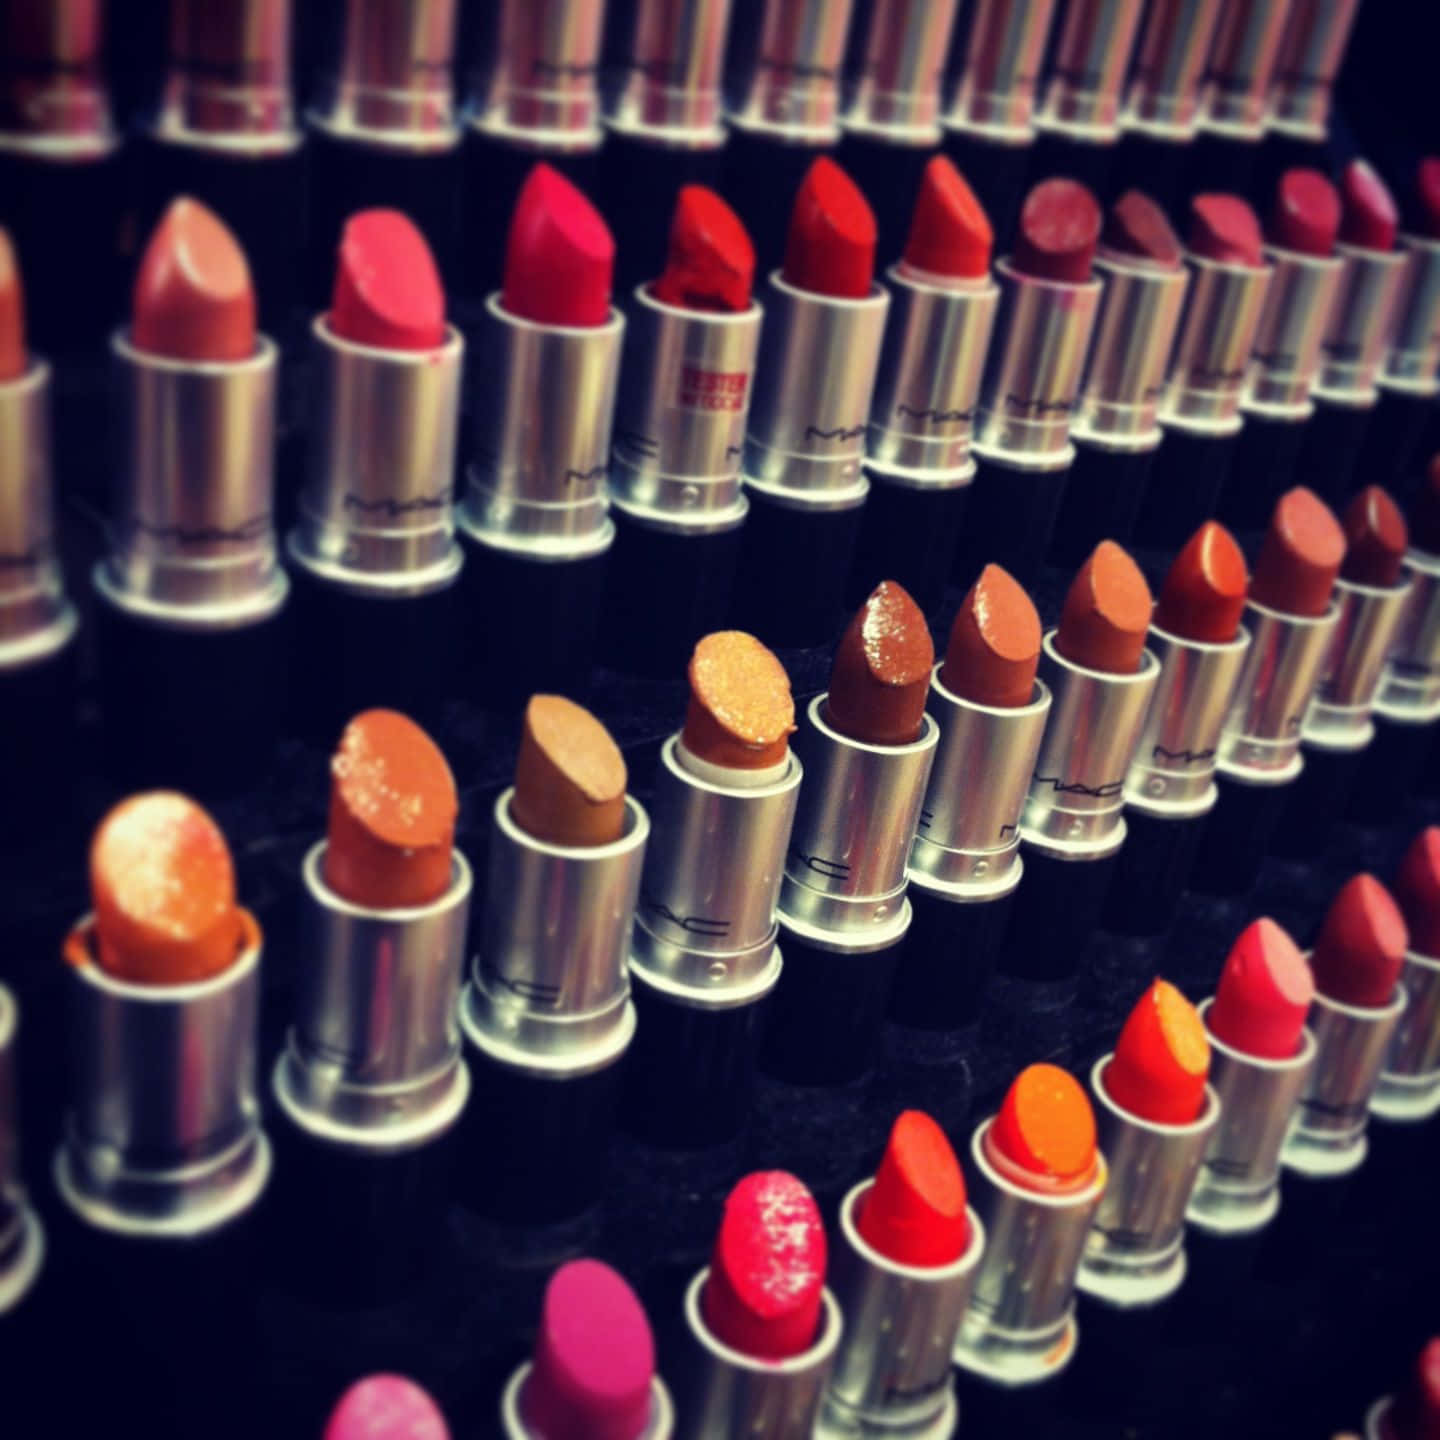 Enhance your everyday look with vibrant makeup from Mac Cosmetics